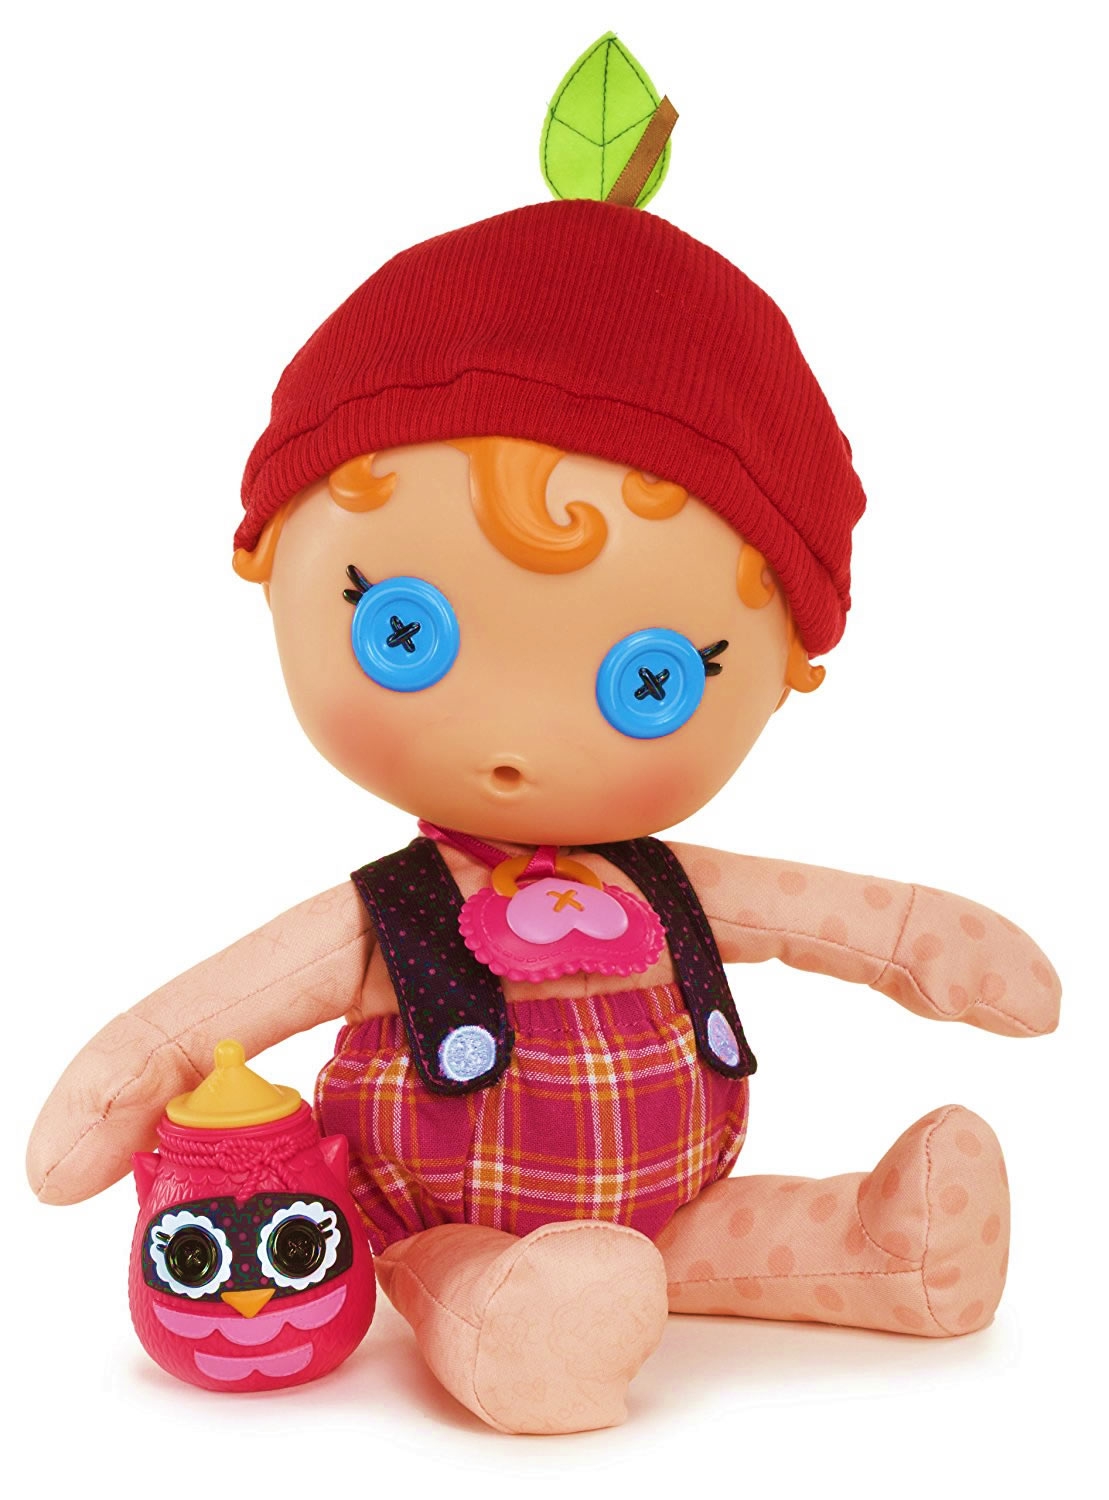 Lalaloopsy Babbies 'Bea Spells-a-lot' Plush Doll Toy